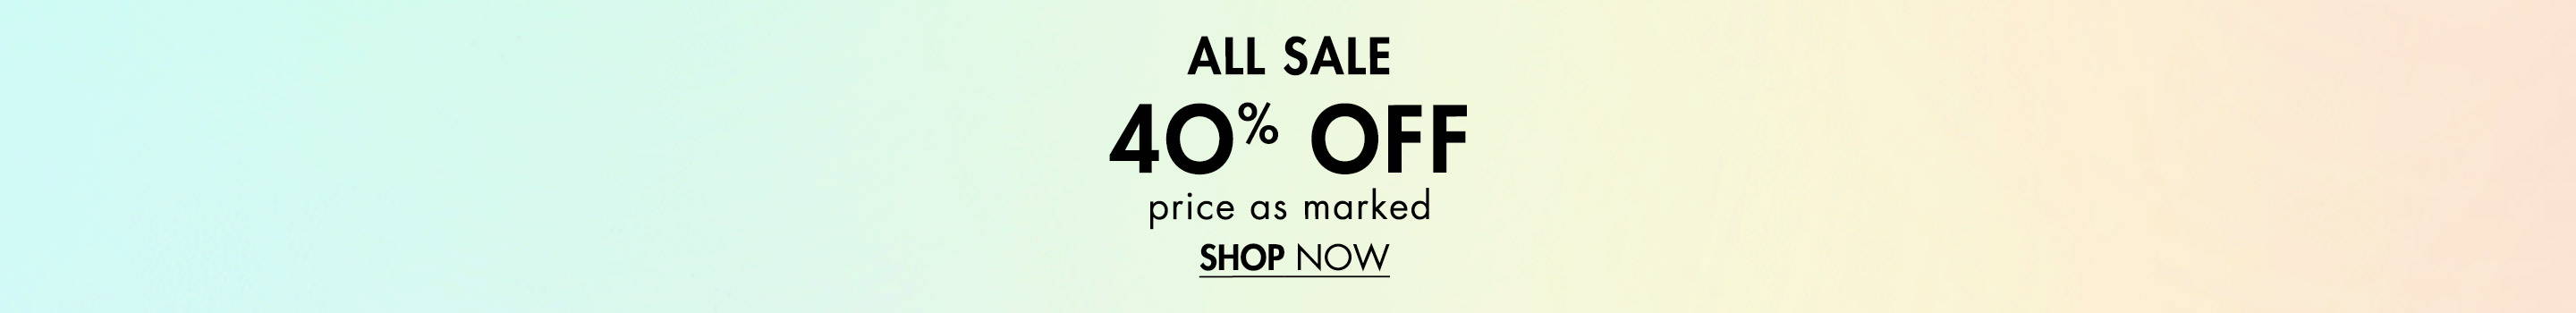 All Sale 40% Off